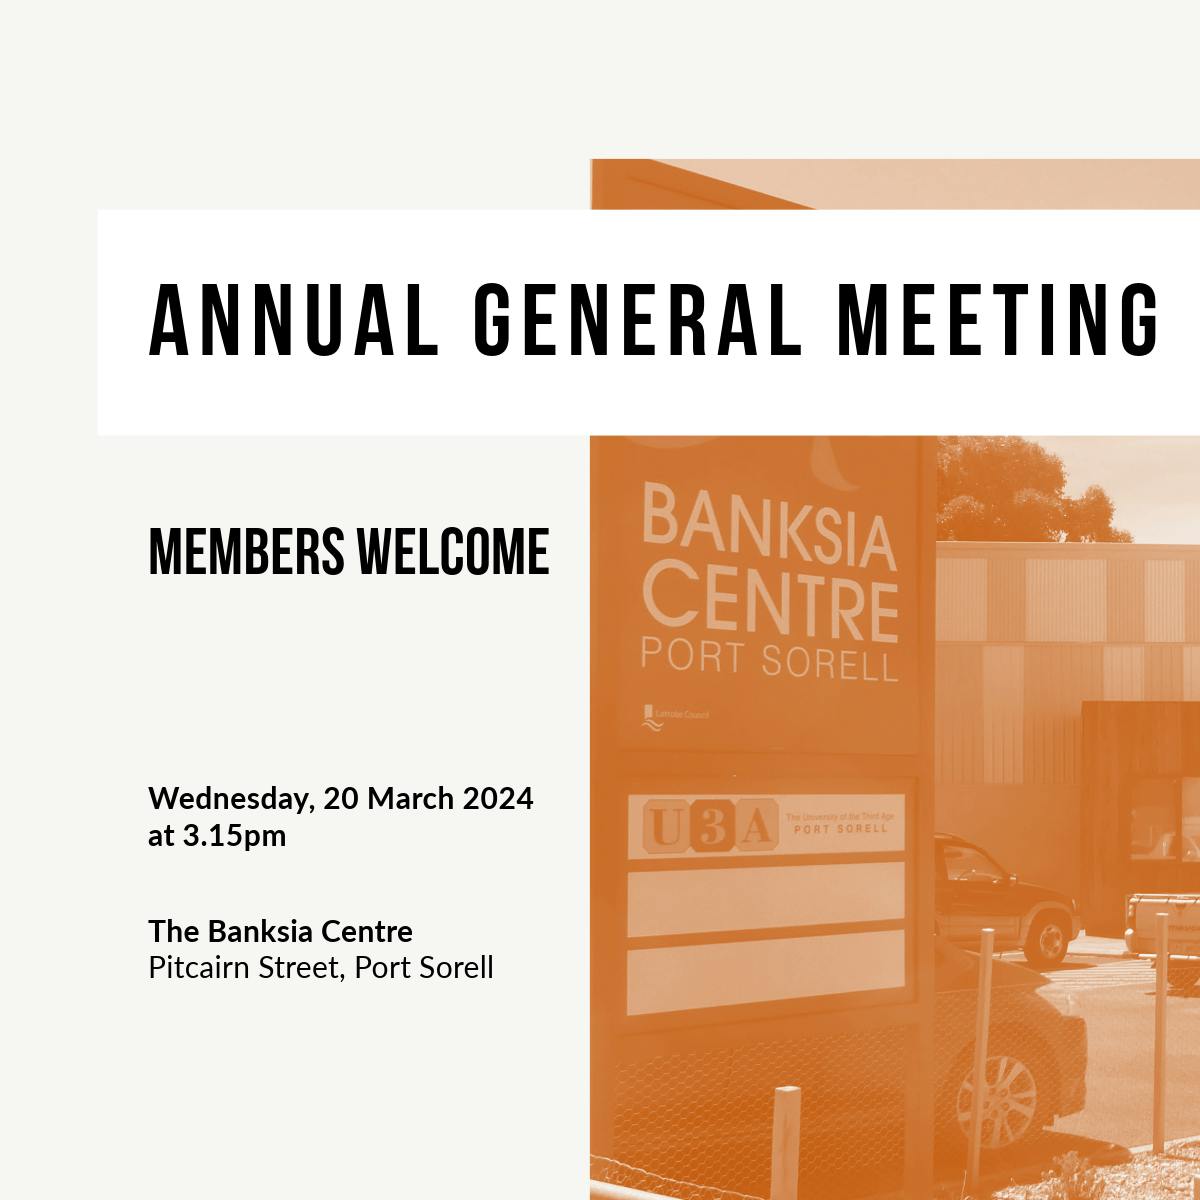 Annual General Meeting Wednesday 20 March 2024 at 3.15pm in the Banksia Centre, Port Sorell